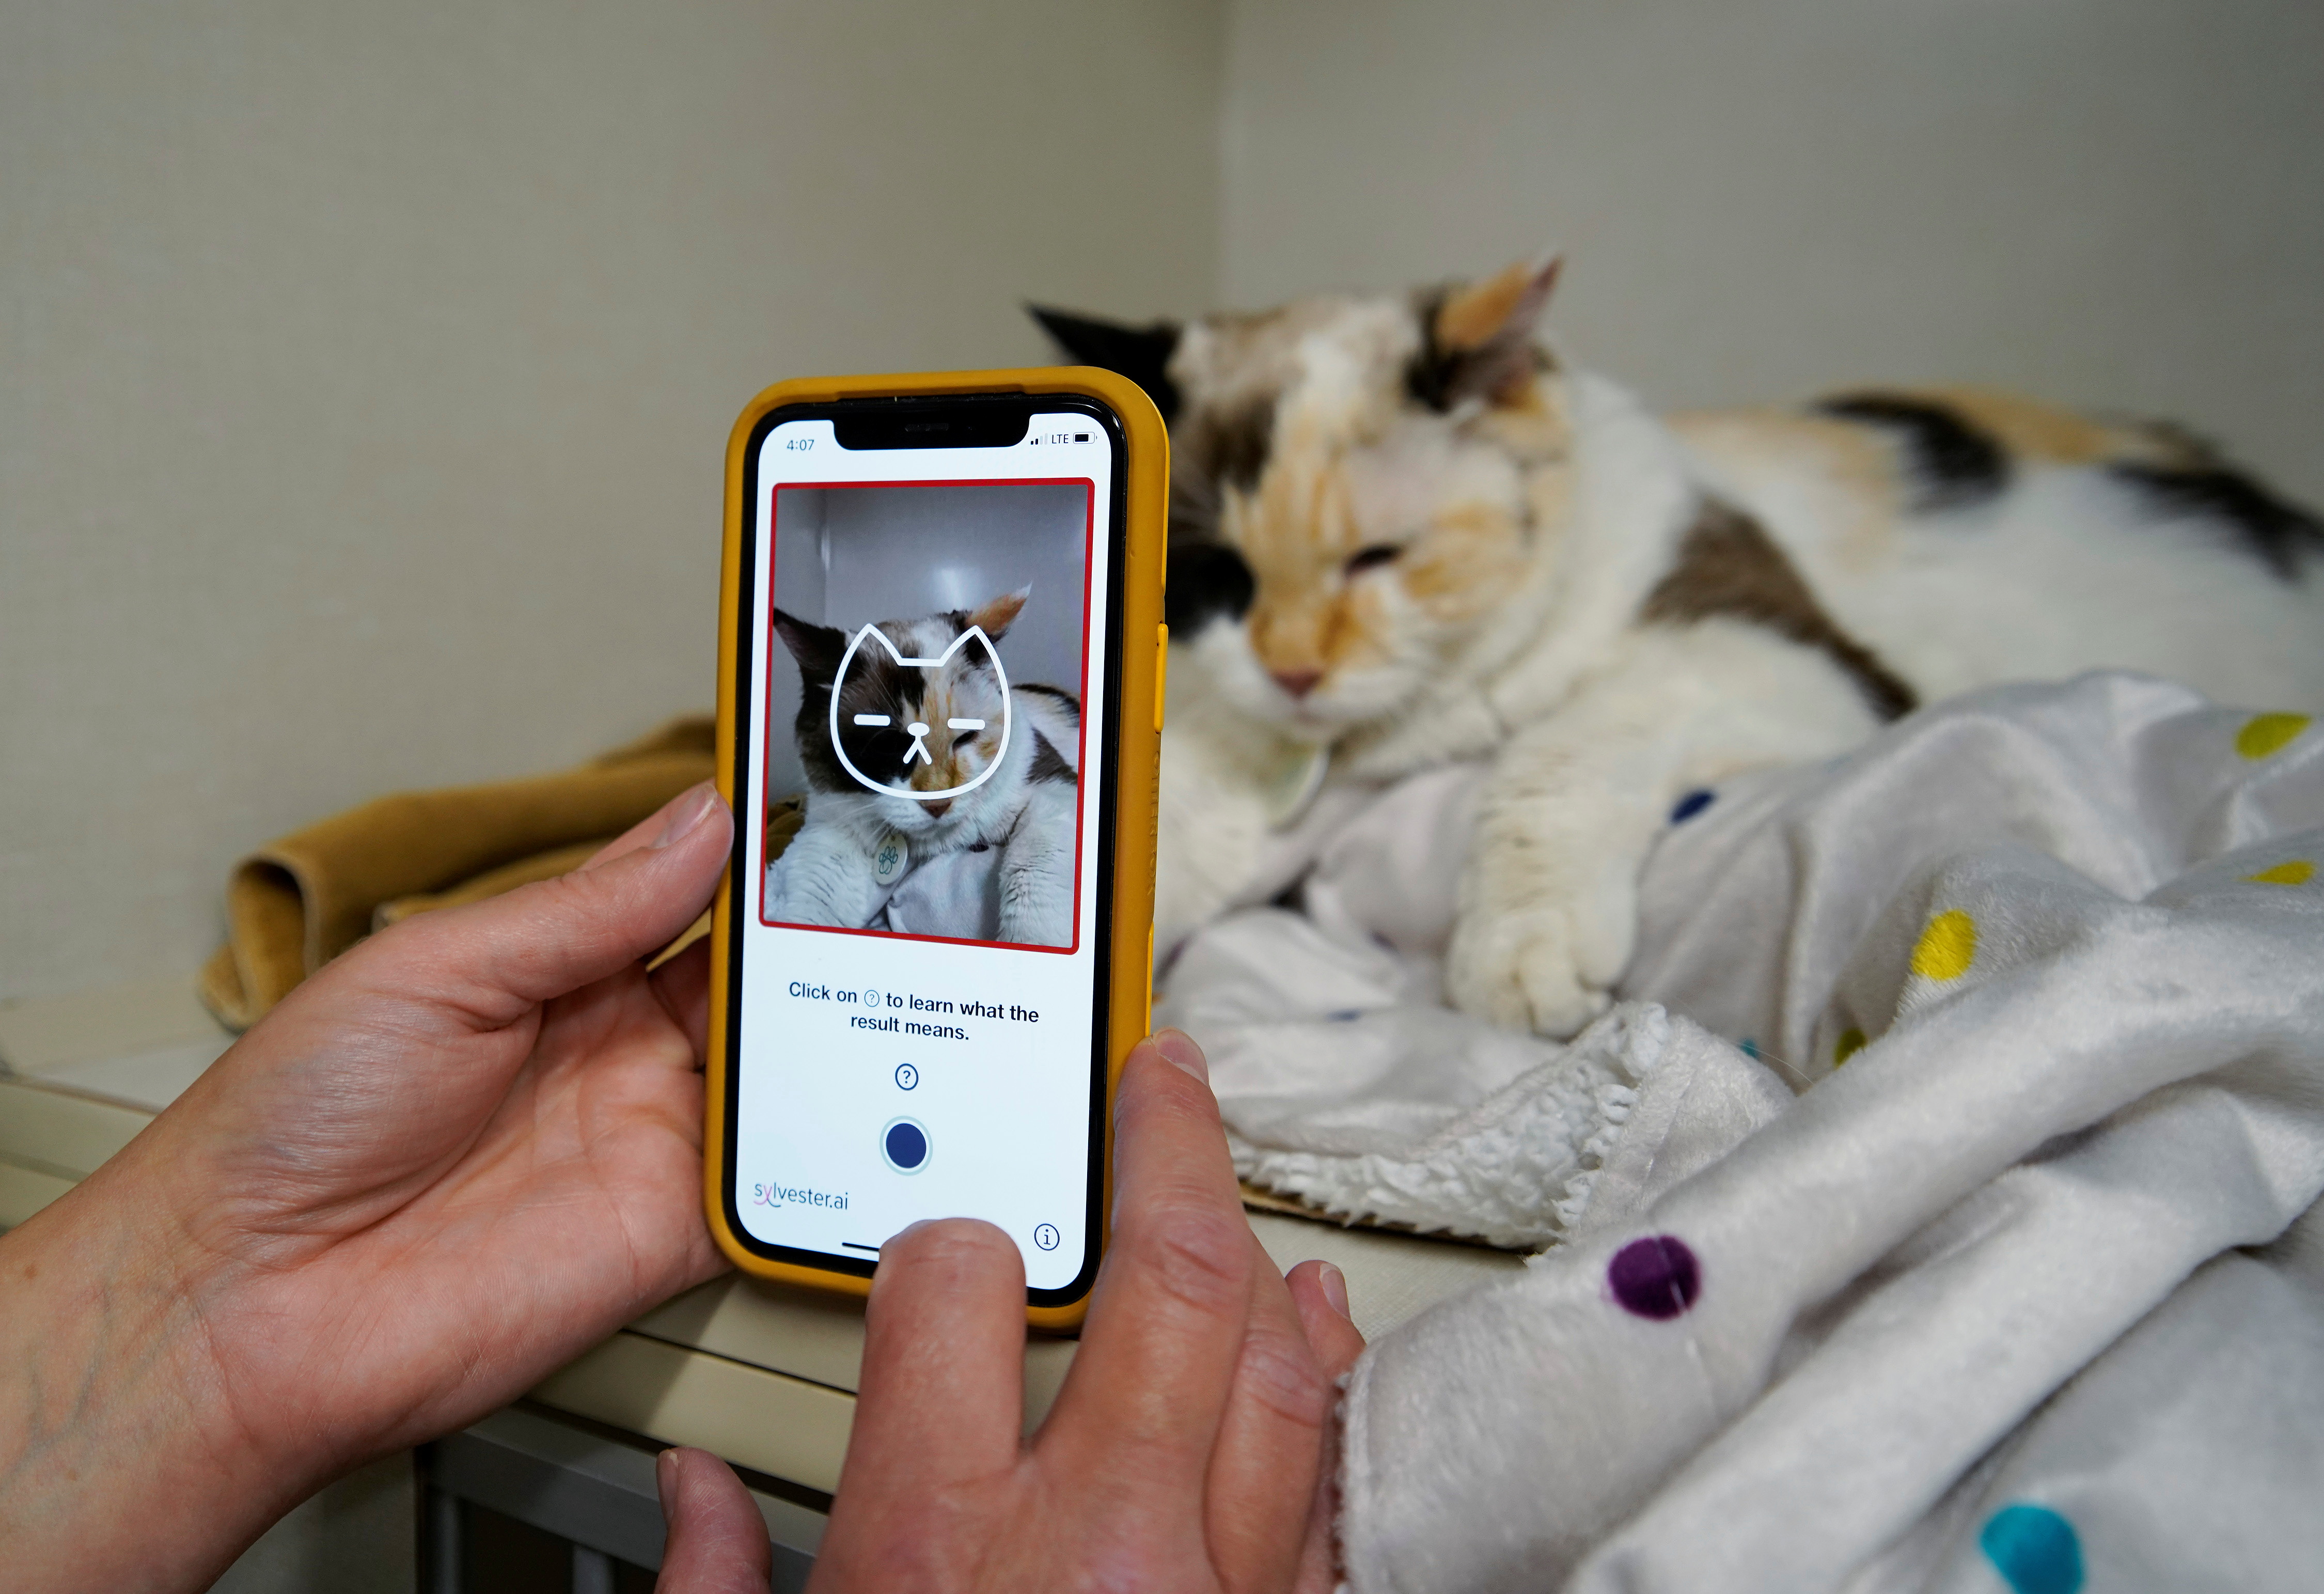 Dr. Liz Ruelle uses a new app called Tably that reads cat's faces and helps her monitor a cat's health at the Wild Rose Cat clinic in Calgary